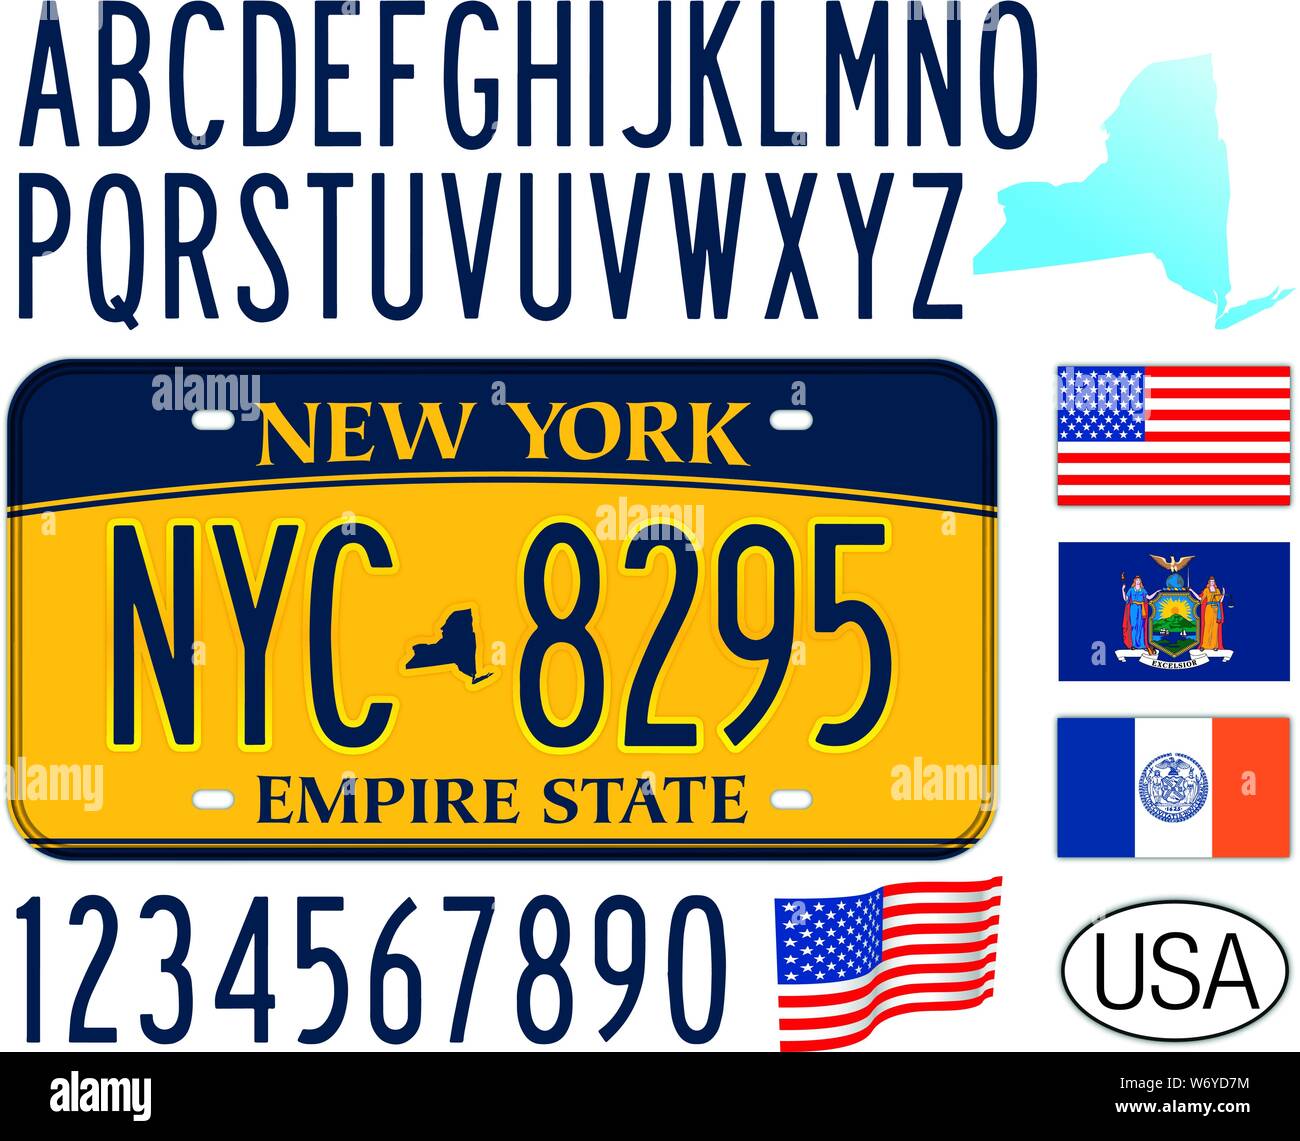 New York State car license plate, letters, numbers and symbols